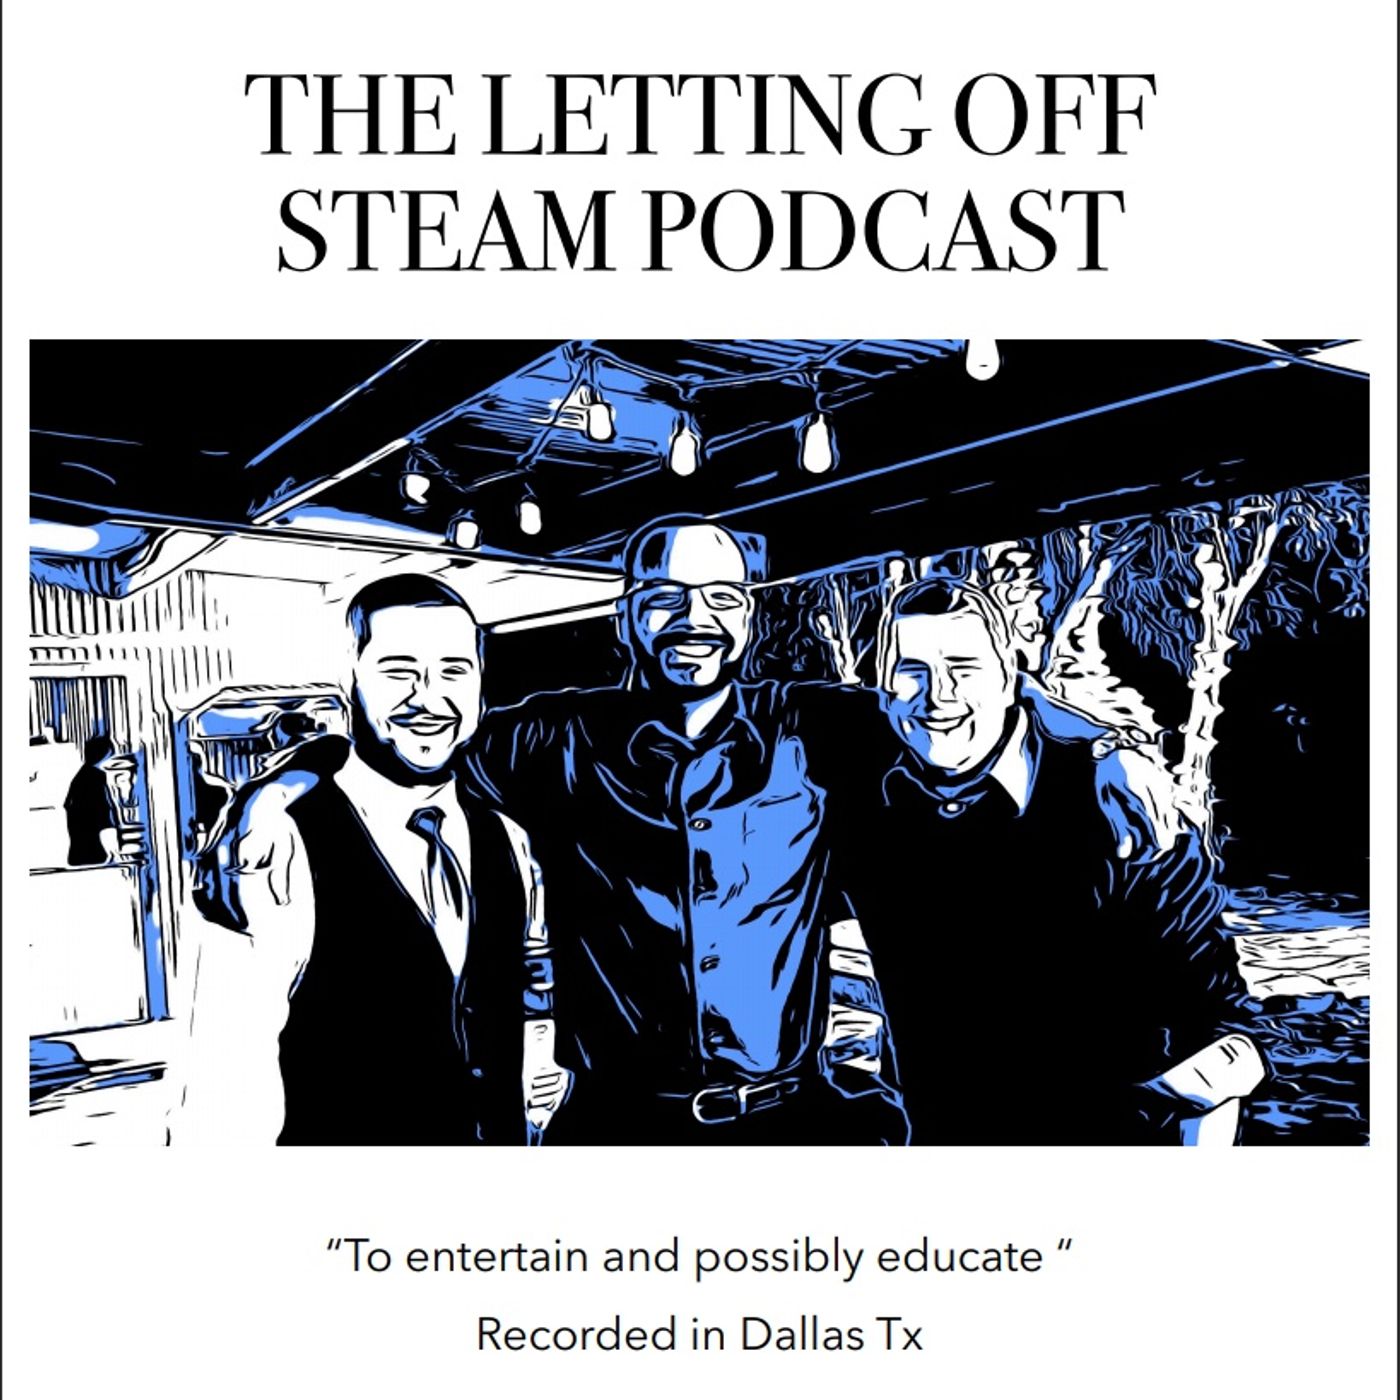 The Letting Off Steam Podcast